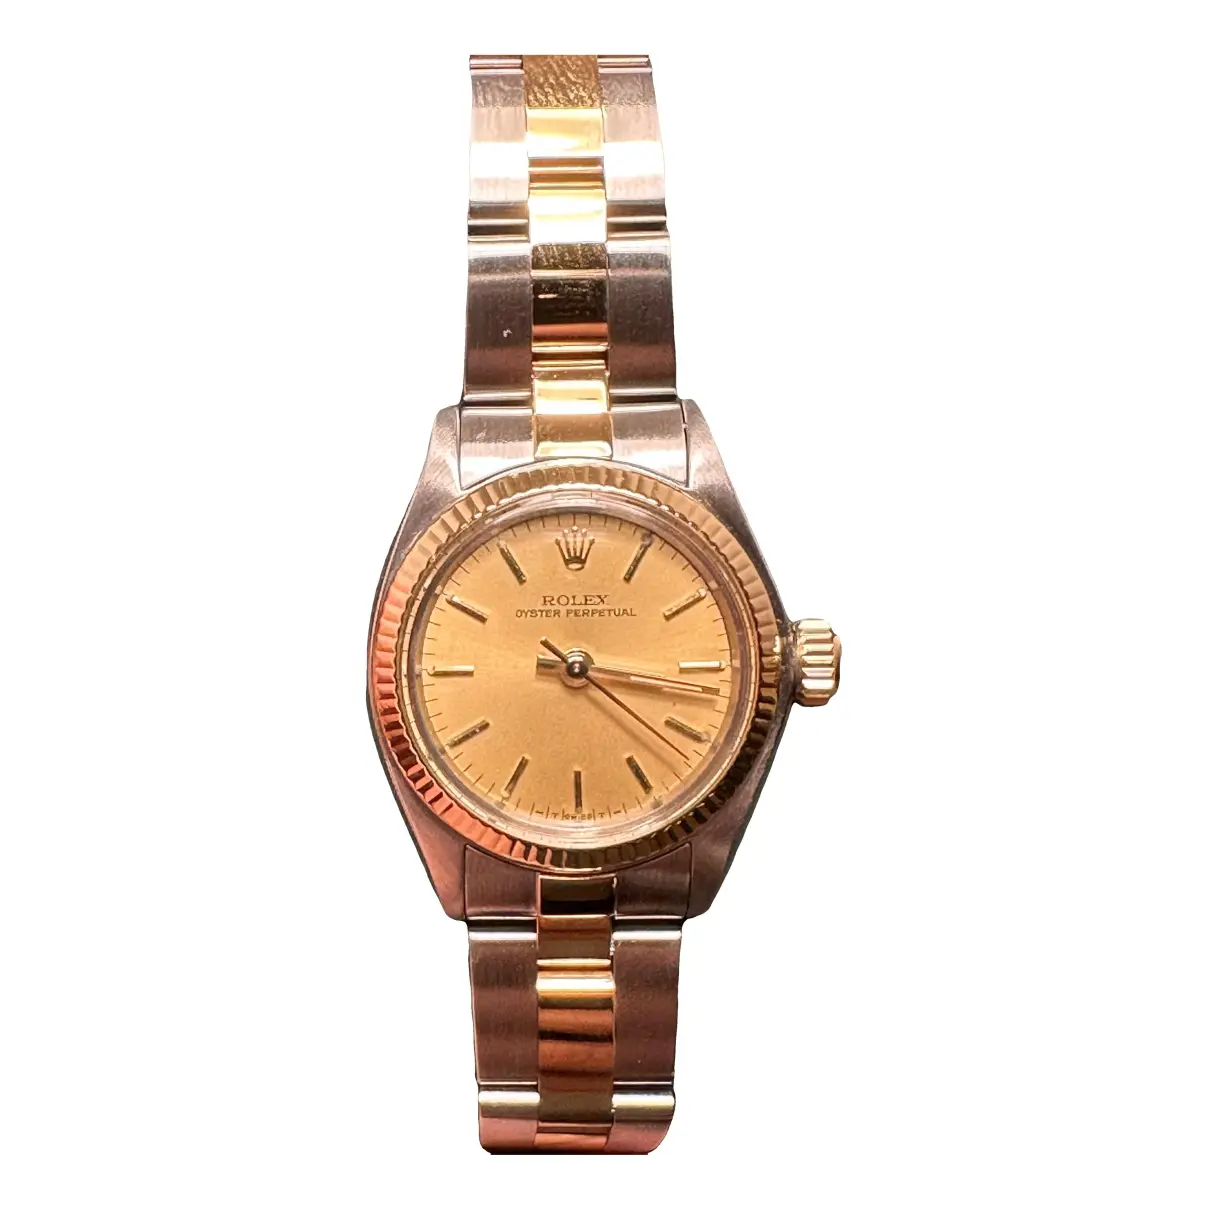 Lady Oyster Perpetual 26mm watch